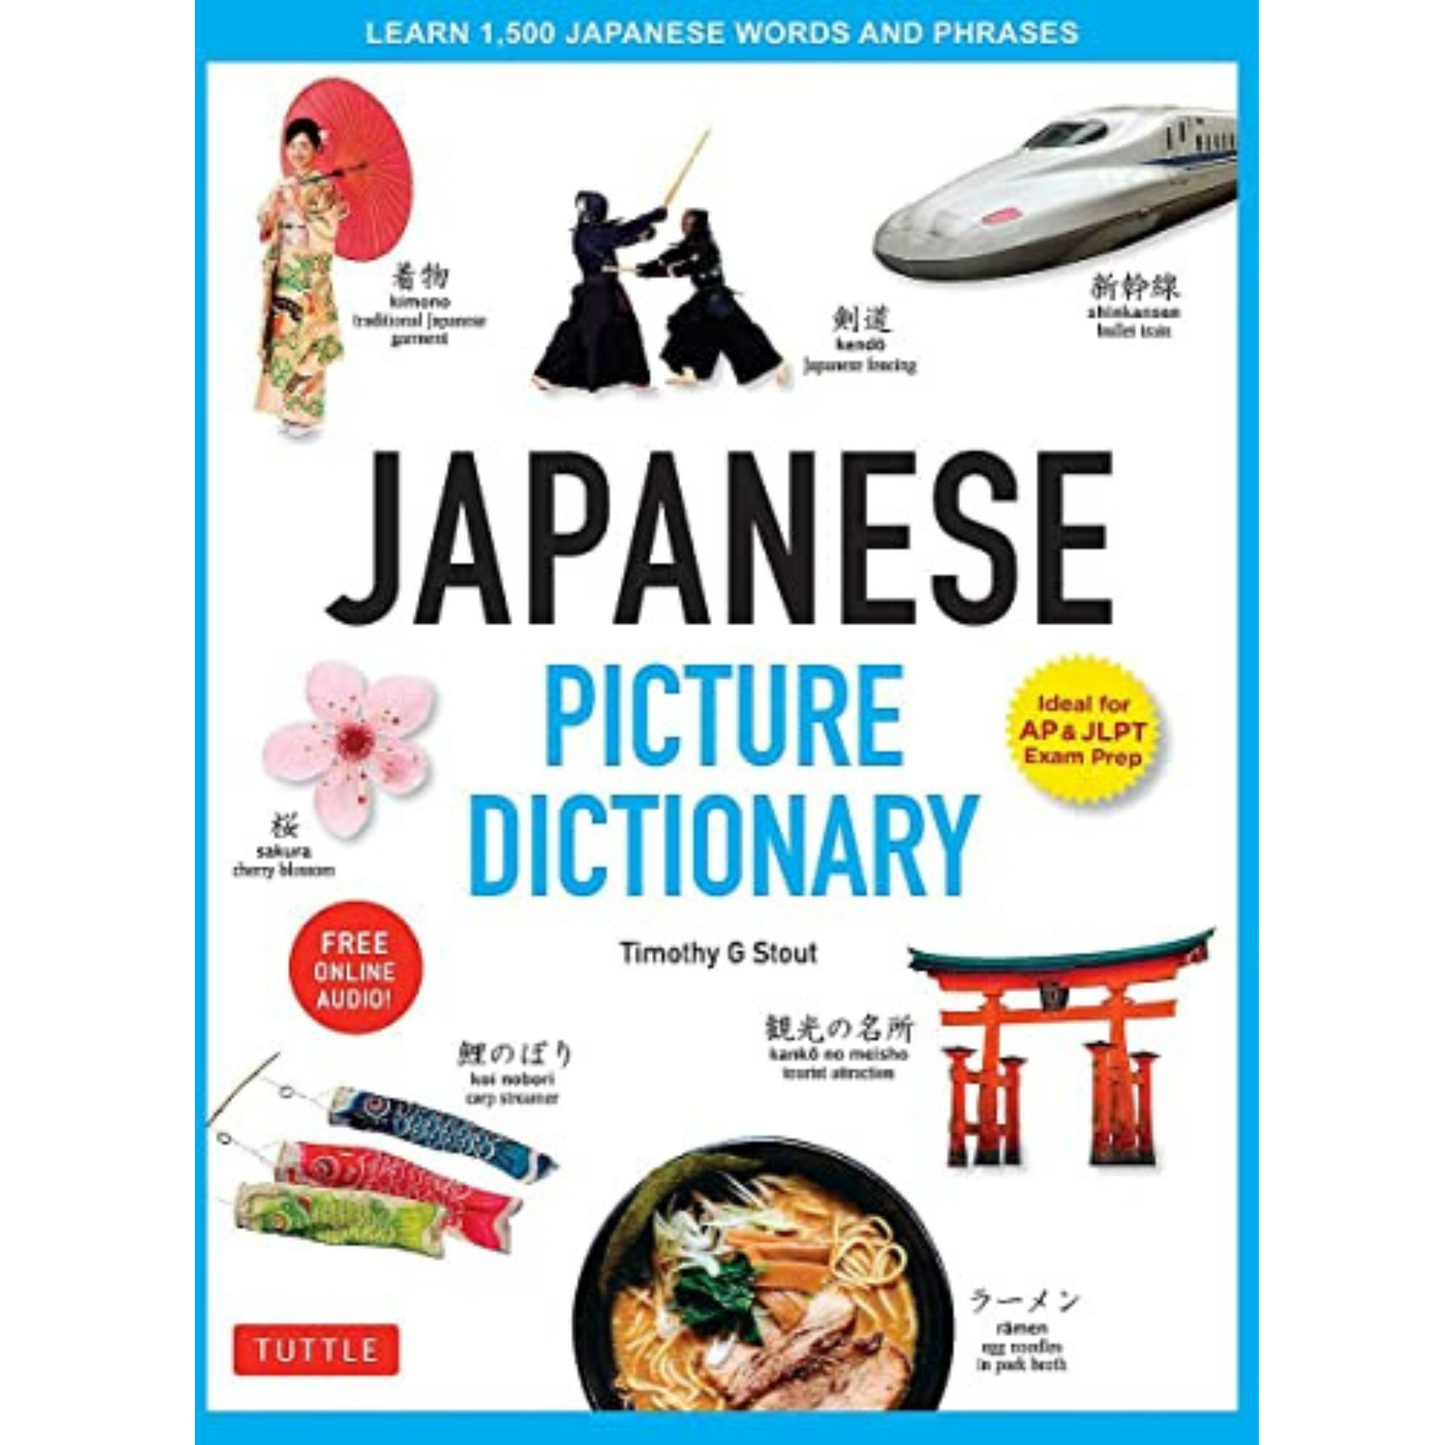 Japanese Picture Dictionary: Learn 1,500 Japanese Words and Phrases (Ideal for JLPT & AP Exam Prep; Includes Online Audio)